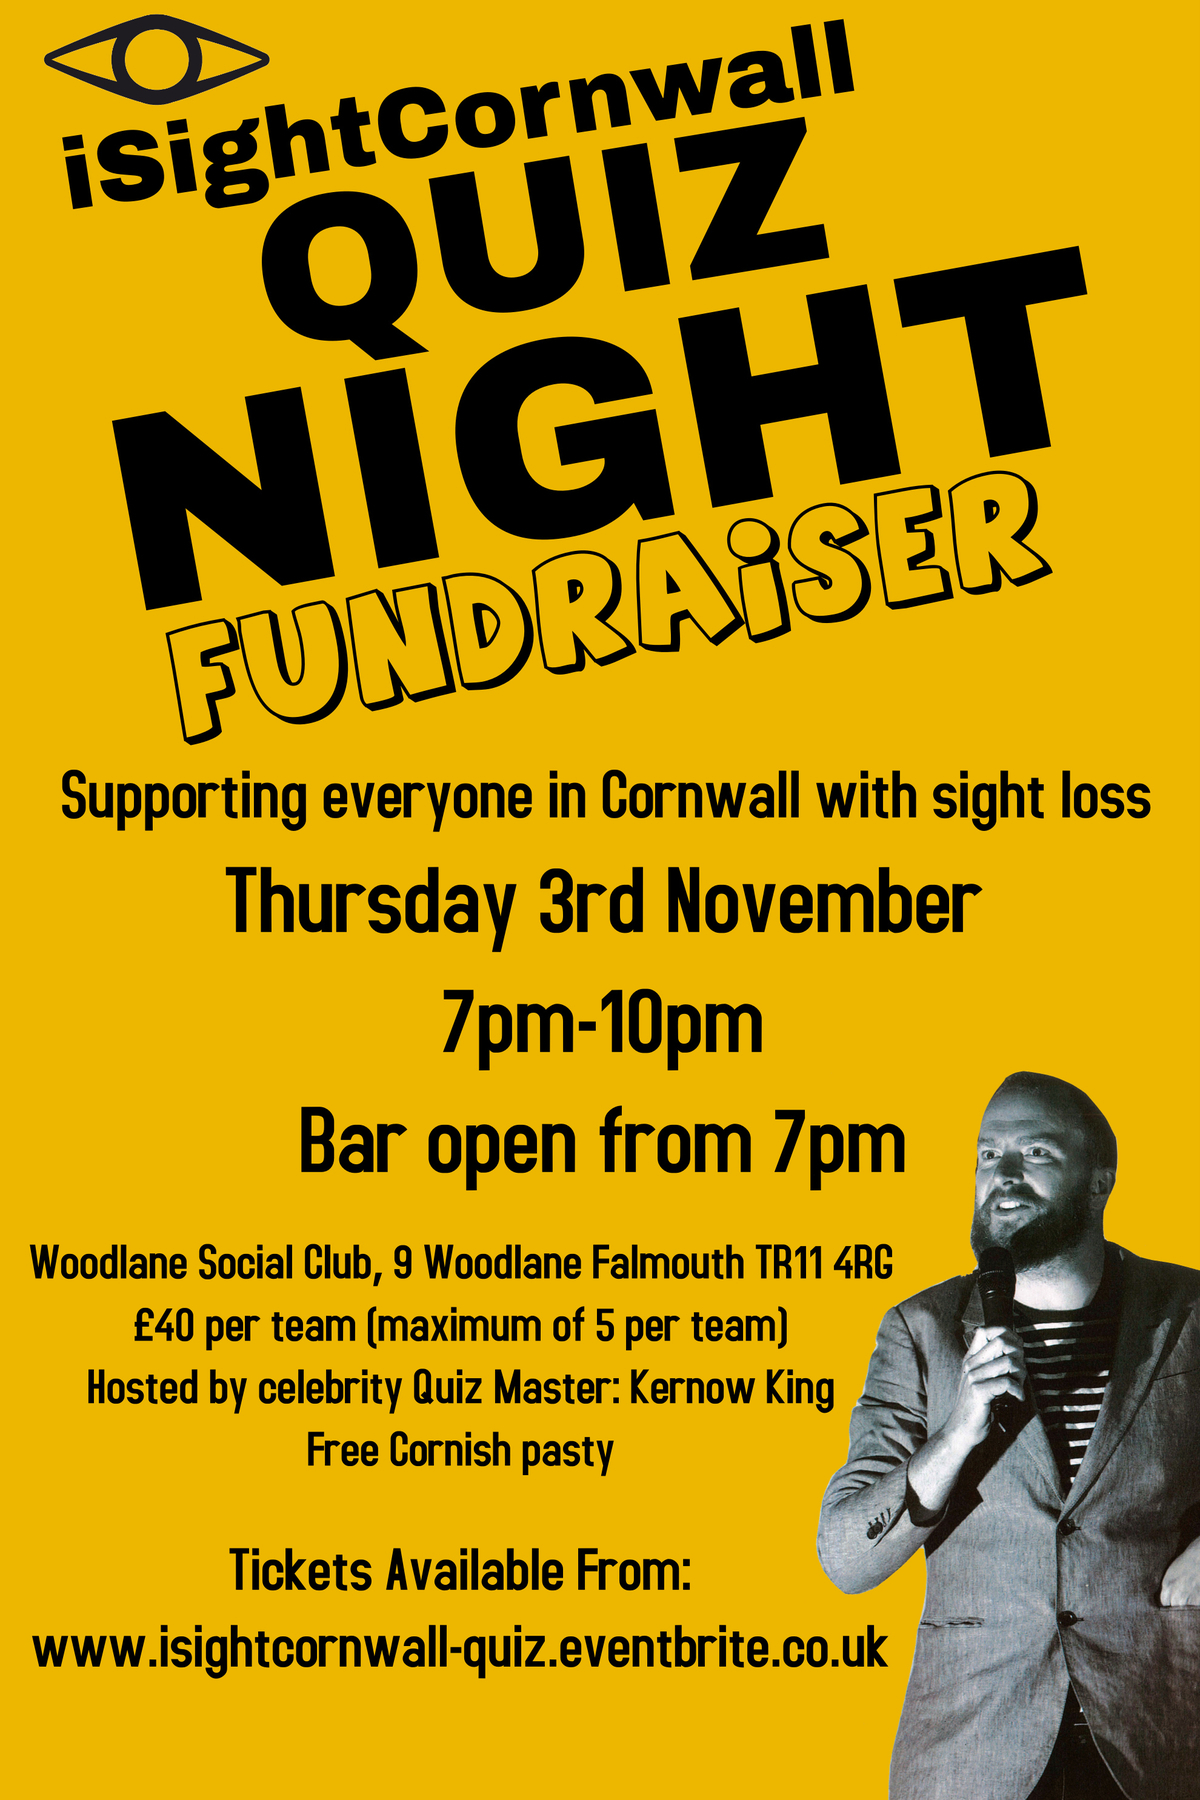 Poster for our iSightCornwall Quiz Night Fundraiser on Thursday 3rd November at Woodlane Social Club, Falmouth.